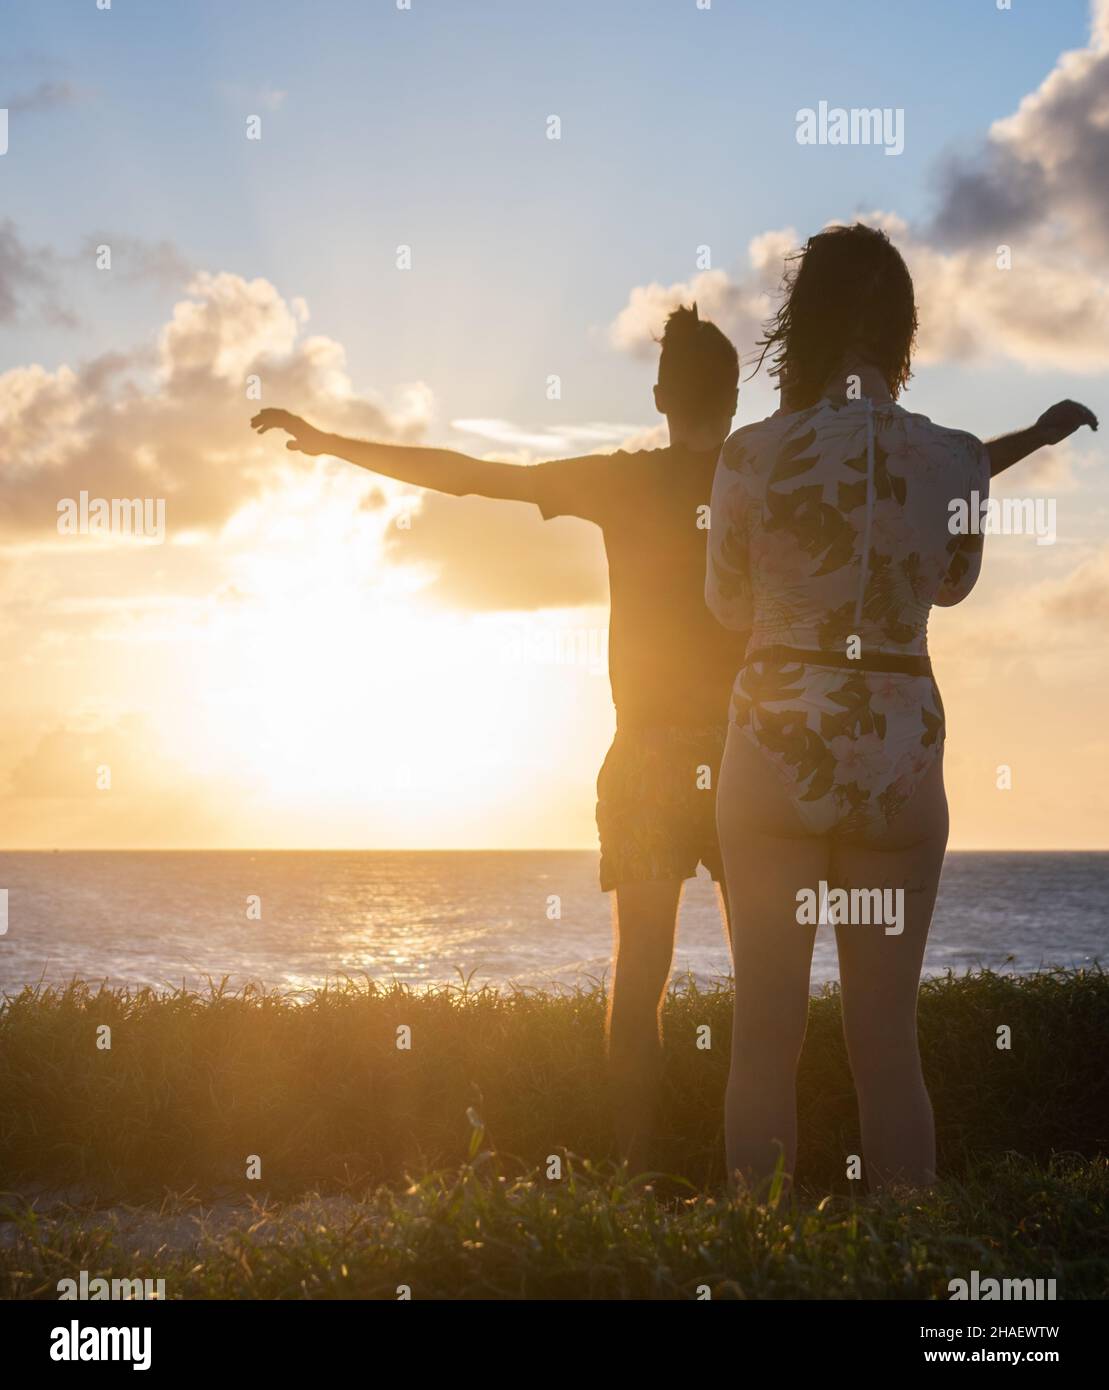 Young people with their backs turned to the setting sun Stock Photo